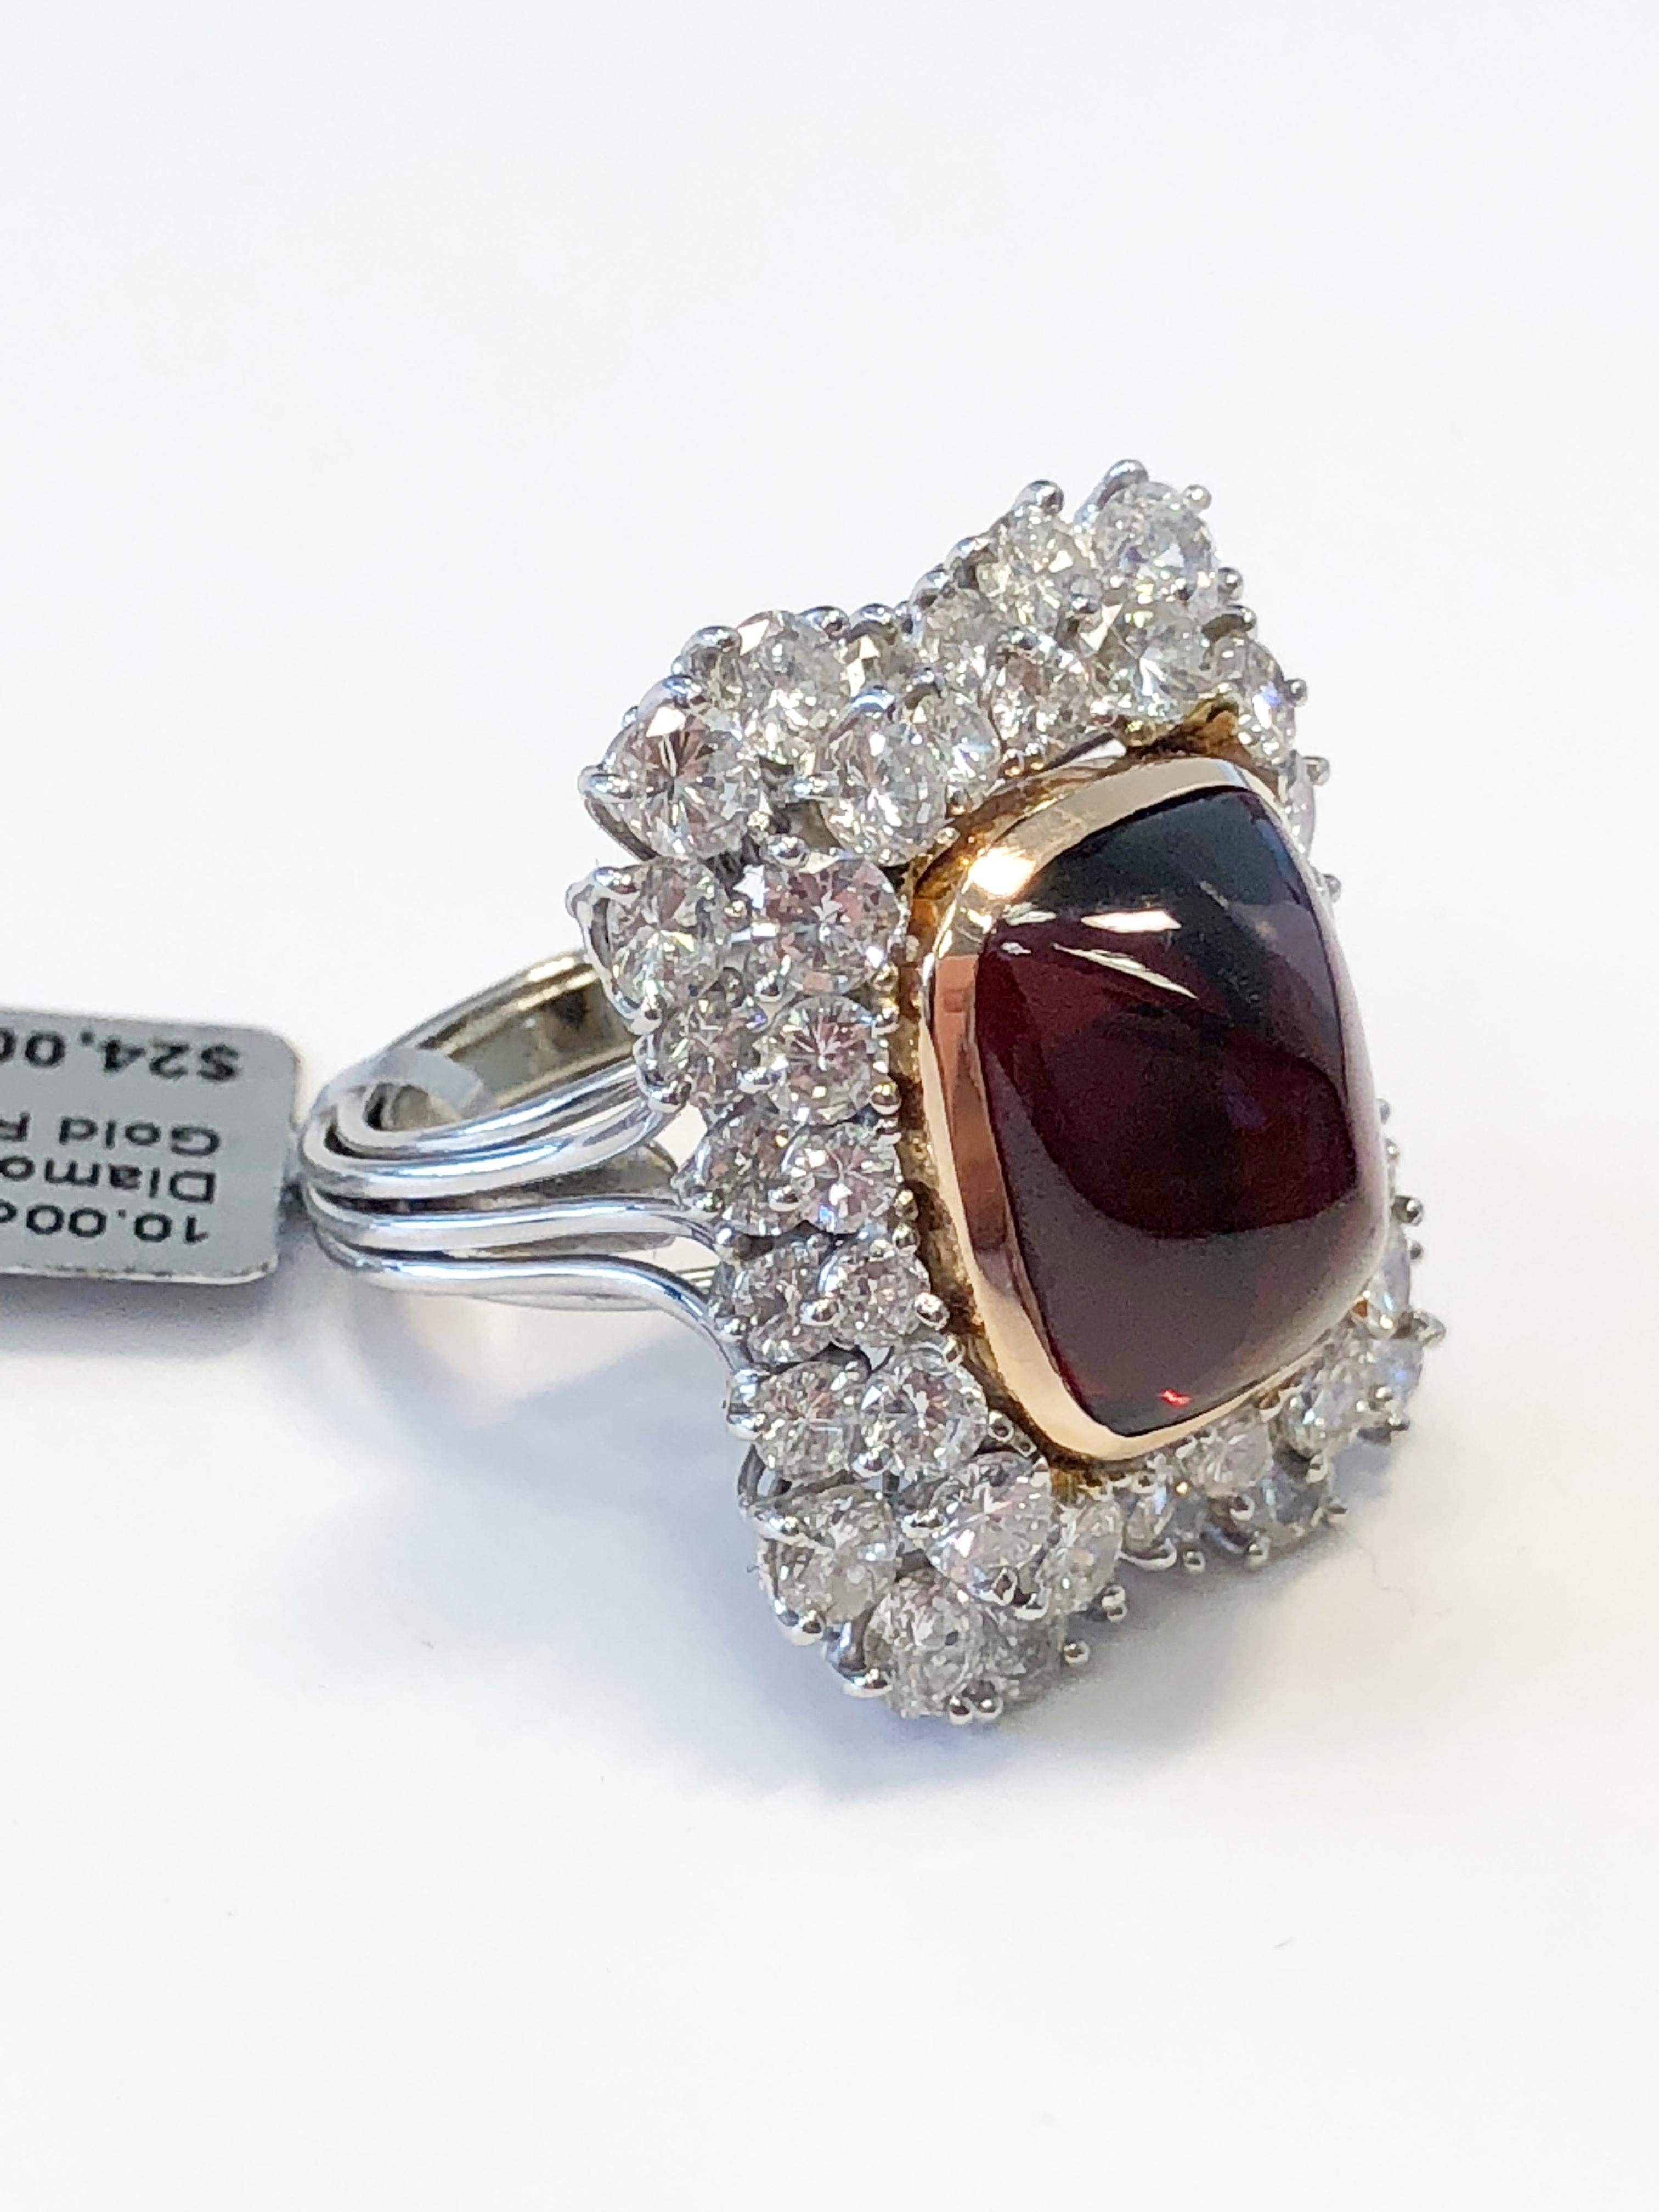 Stunning 10.00 carat sugarloaf garnet with 2.15 carats of good quality bright white diamonds in 18k 2 tone gold.  This garnet is unique in size and color.  Elegant design that showcases the stone's beautiful color and eye catching shape.  Ring size